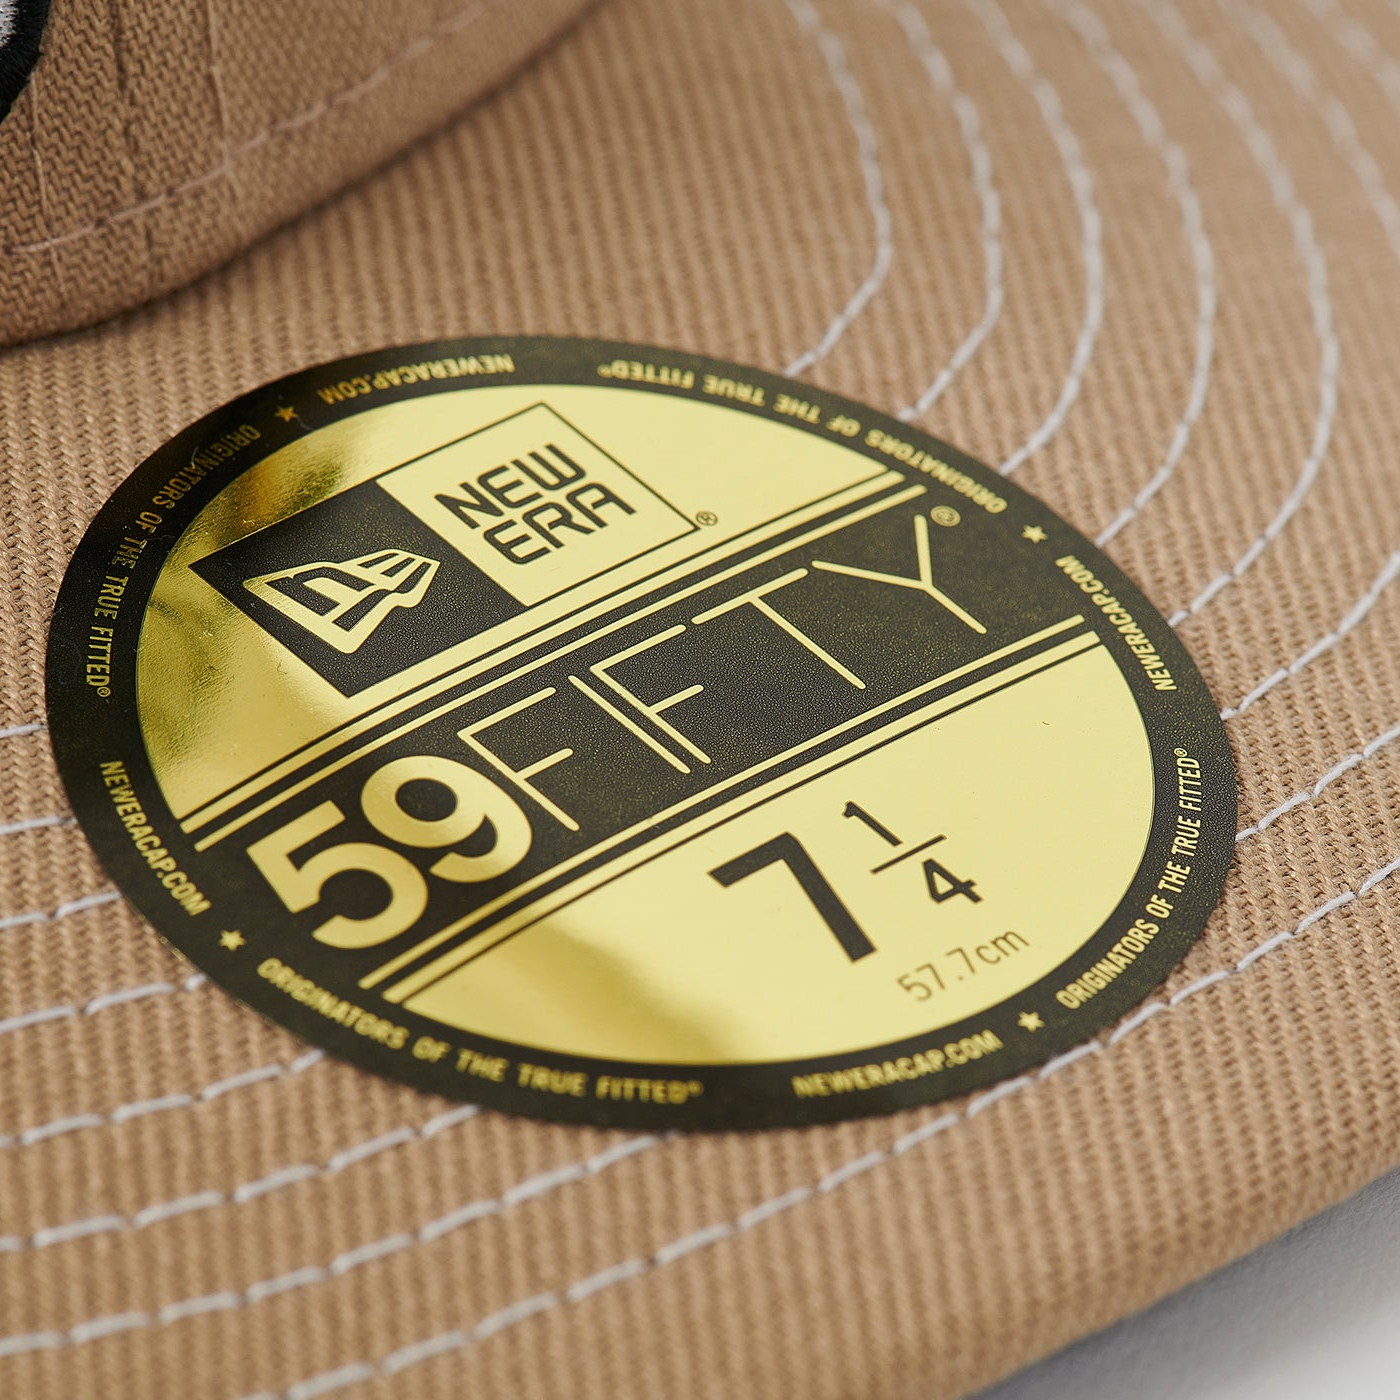 Thumbnail PALACE NEW ERA ALSATIAN 59FIFTY SAND one color